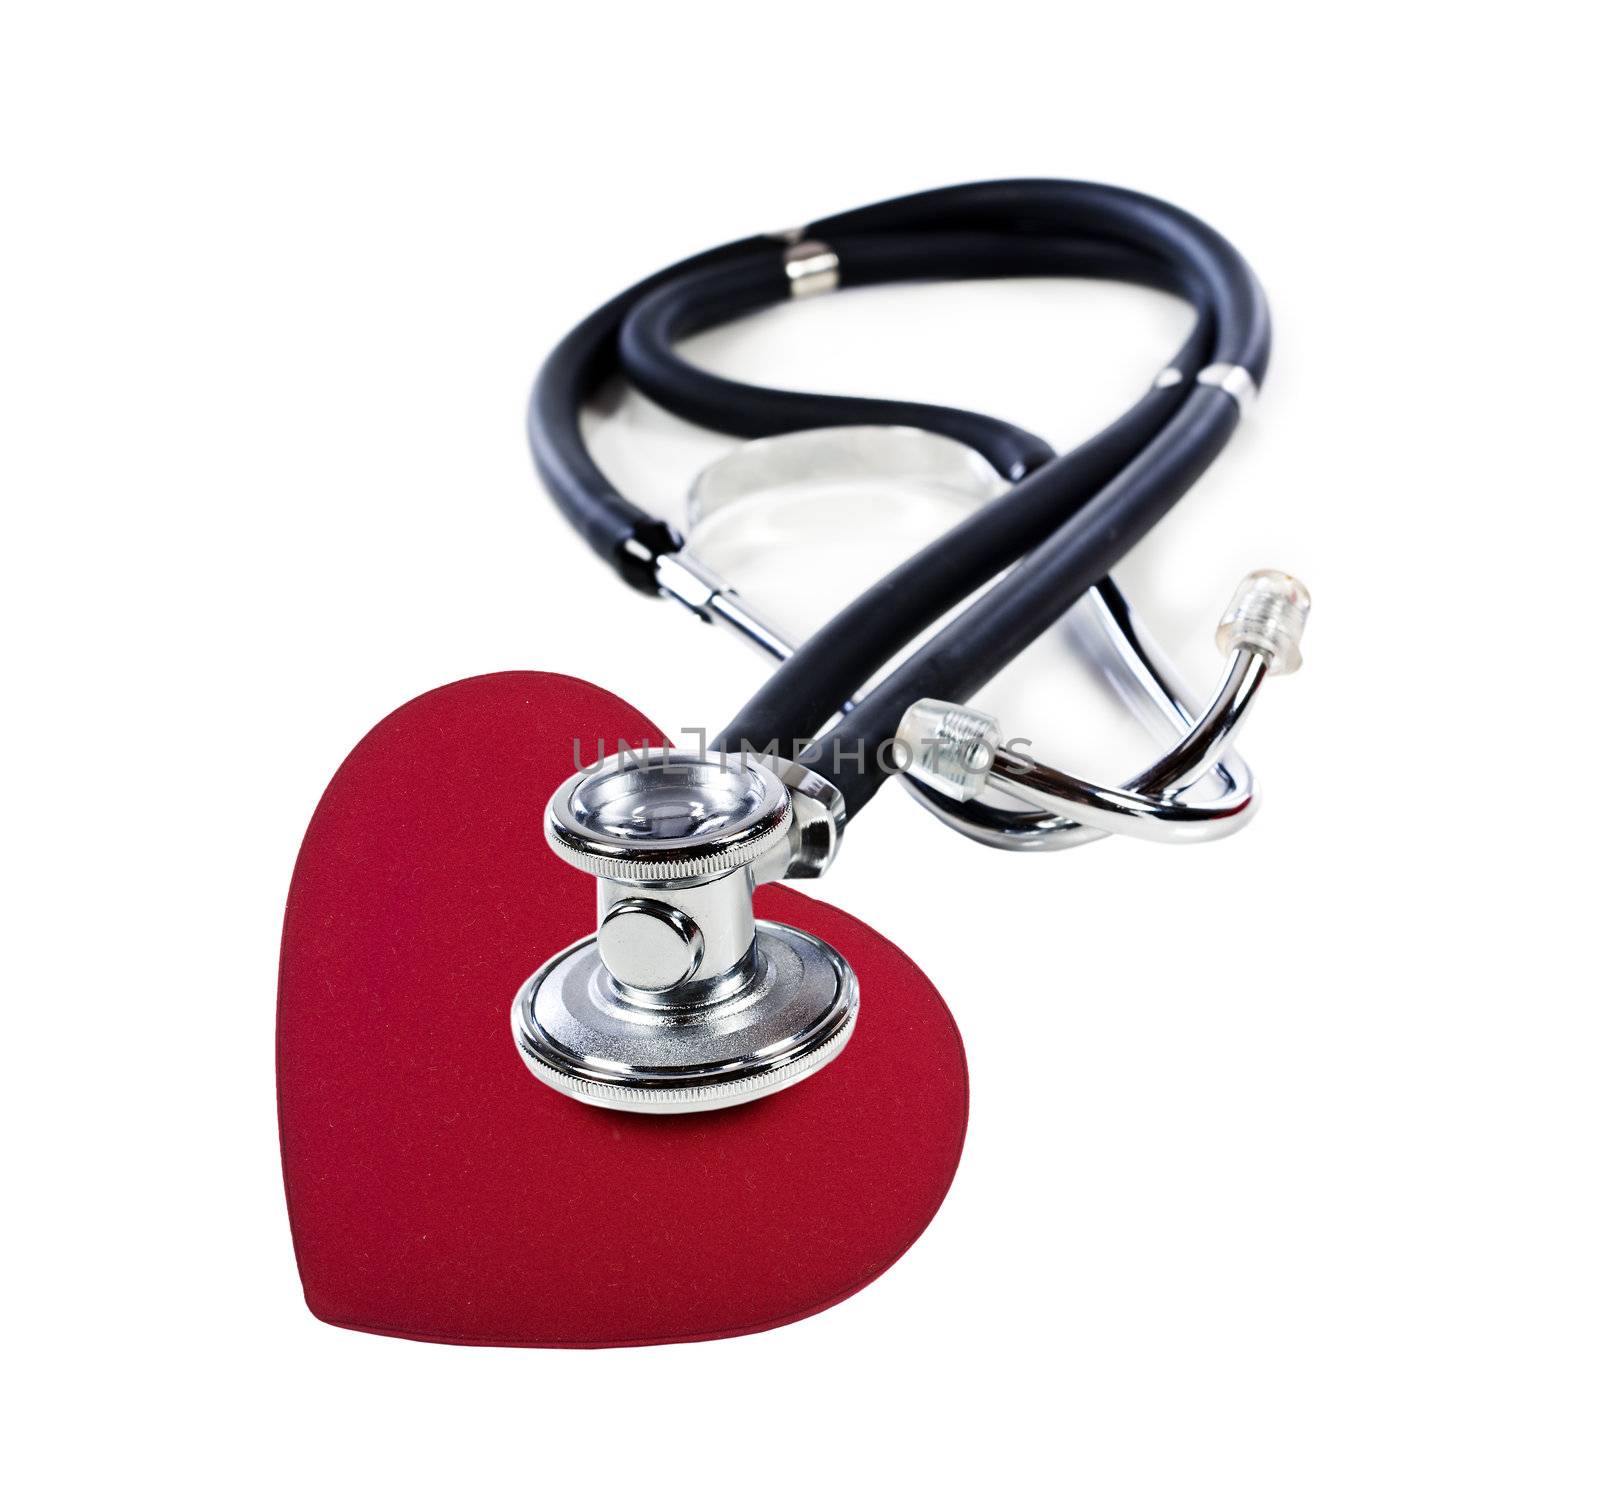 a Doctor's stethoscope listening to a red heart by tish1